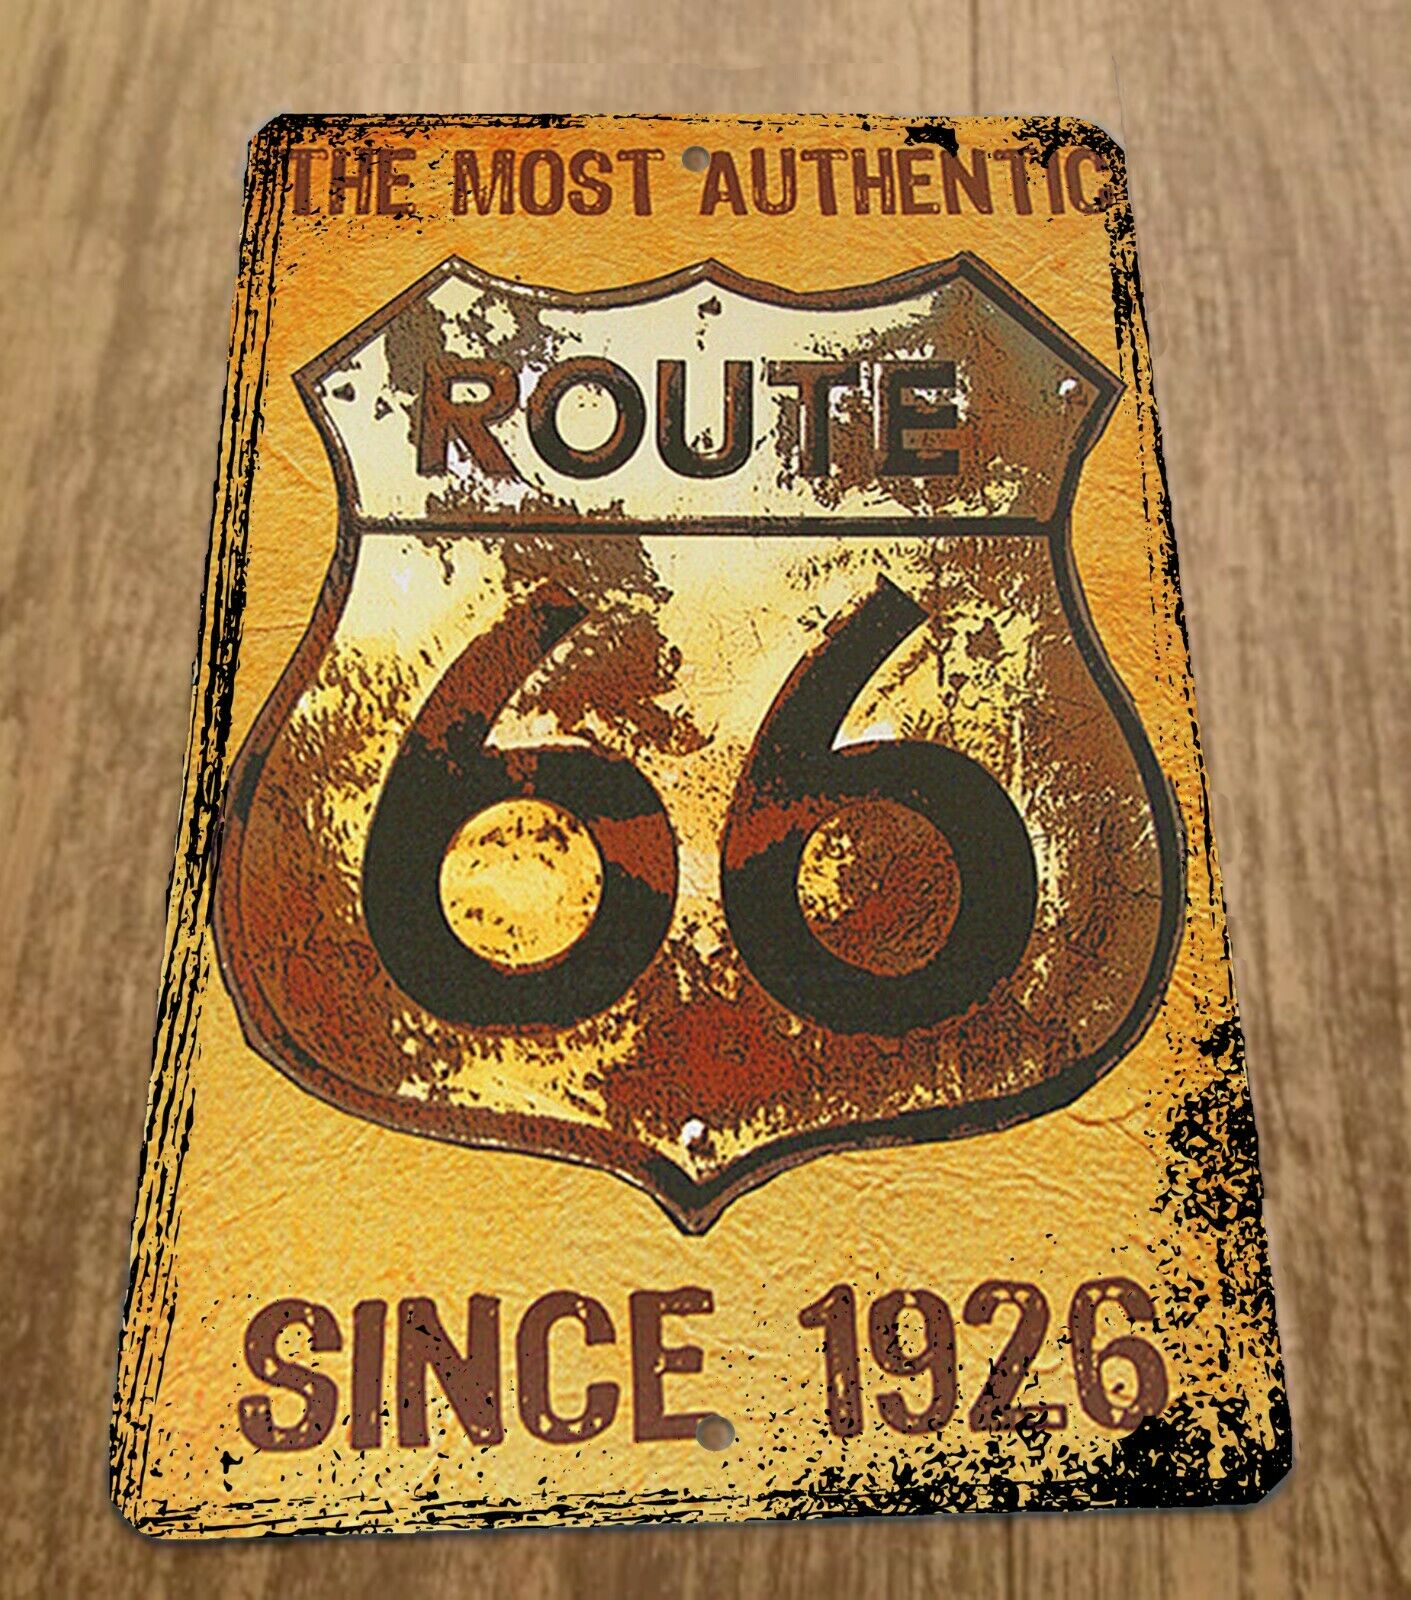 Authentic Route 66 Since 1926 Vintage 8x12 Metal Wall Car Sign Garage Poster